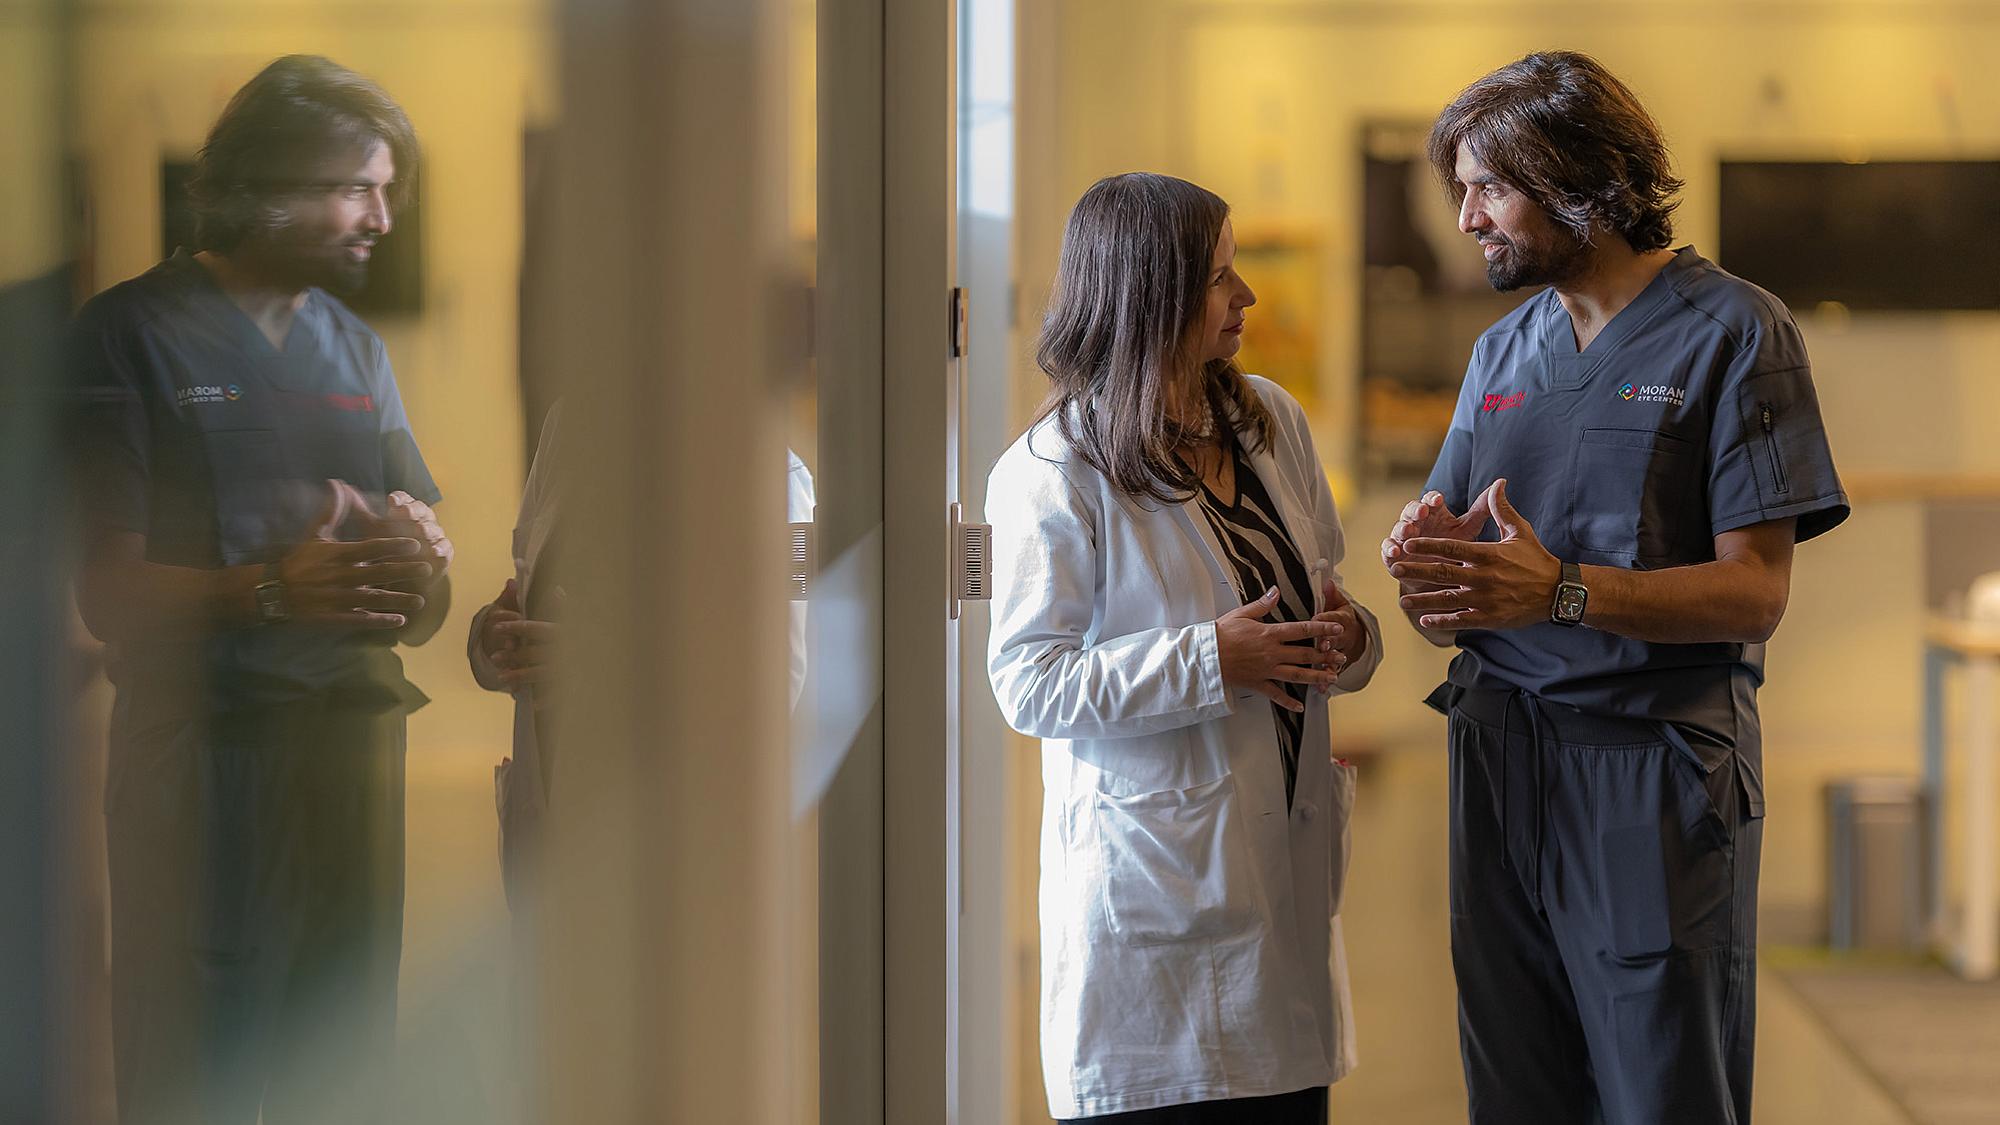 Crandall Center Director Ike Ahmed, MD, speaks with Moran colleague Liliana Werner, MD, PhD, co-director of the Intermountain Ocular Research Center.